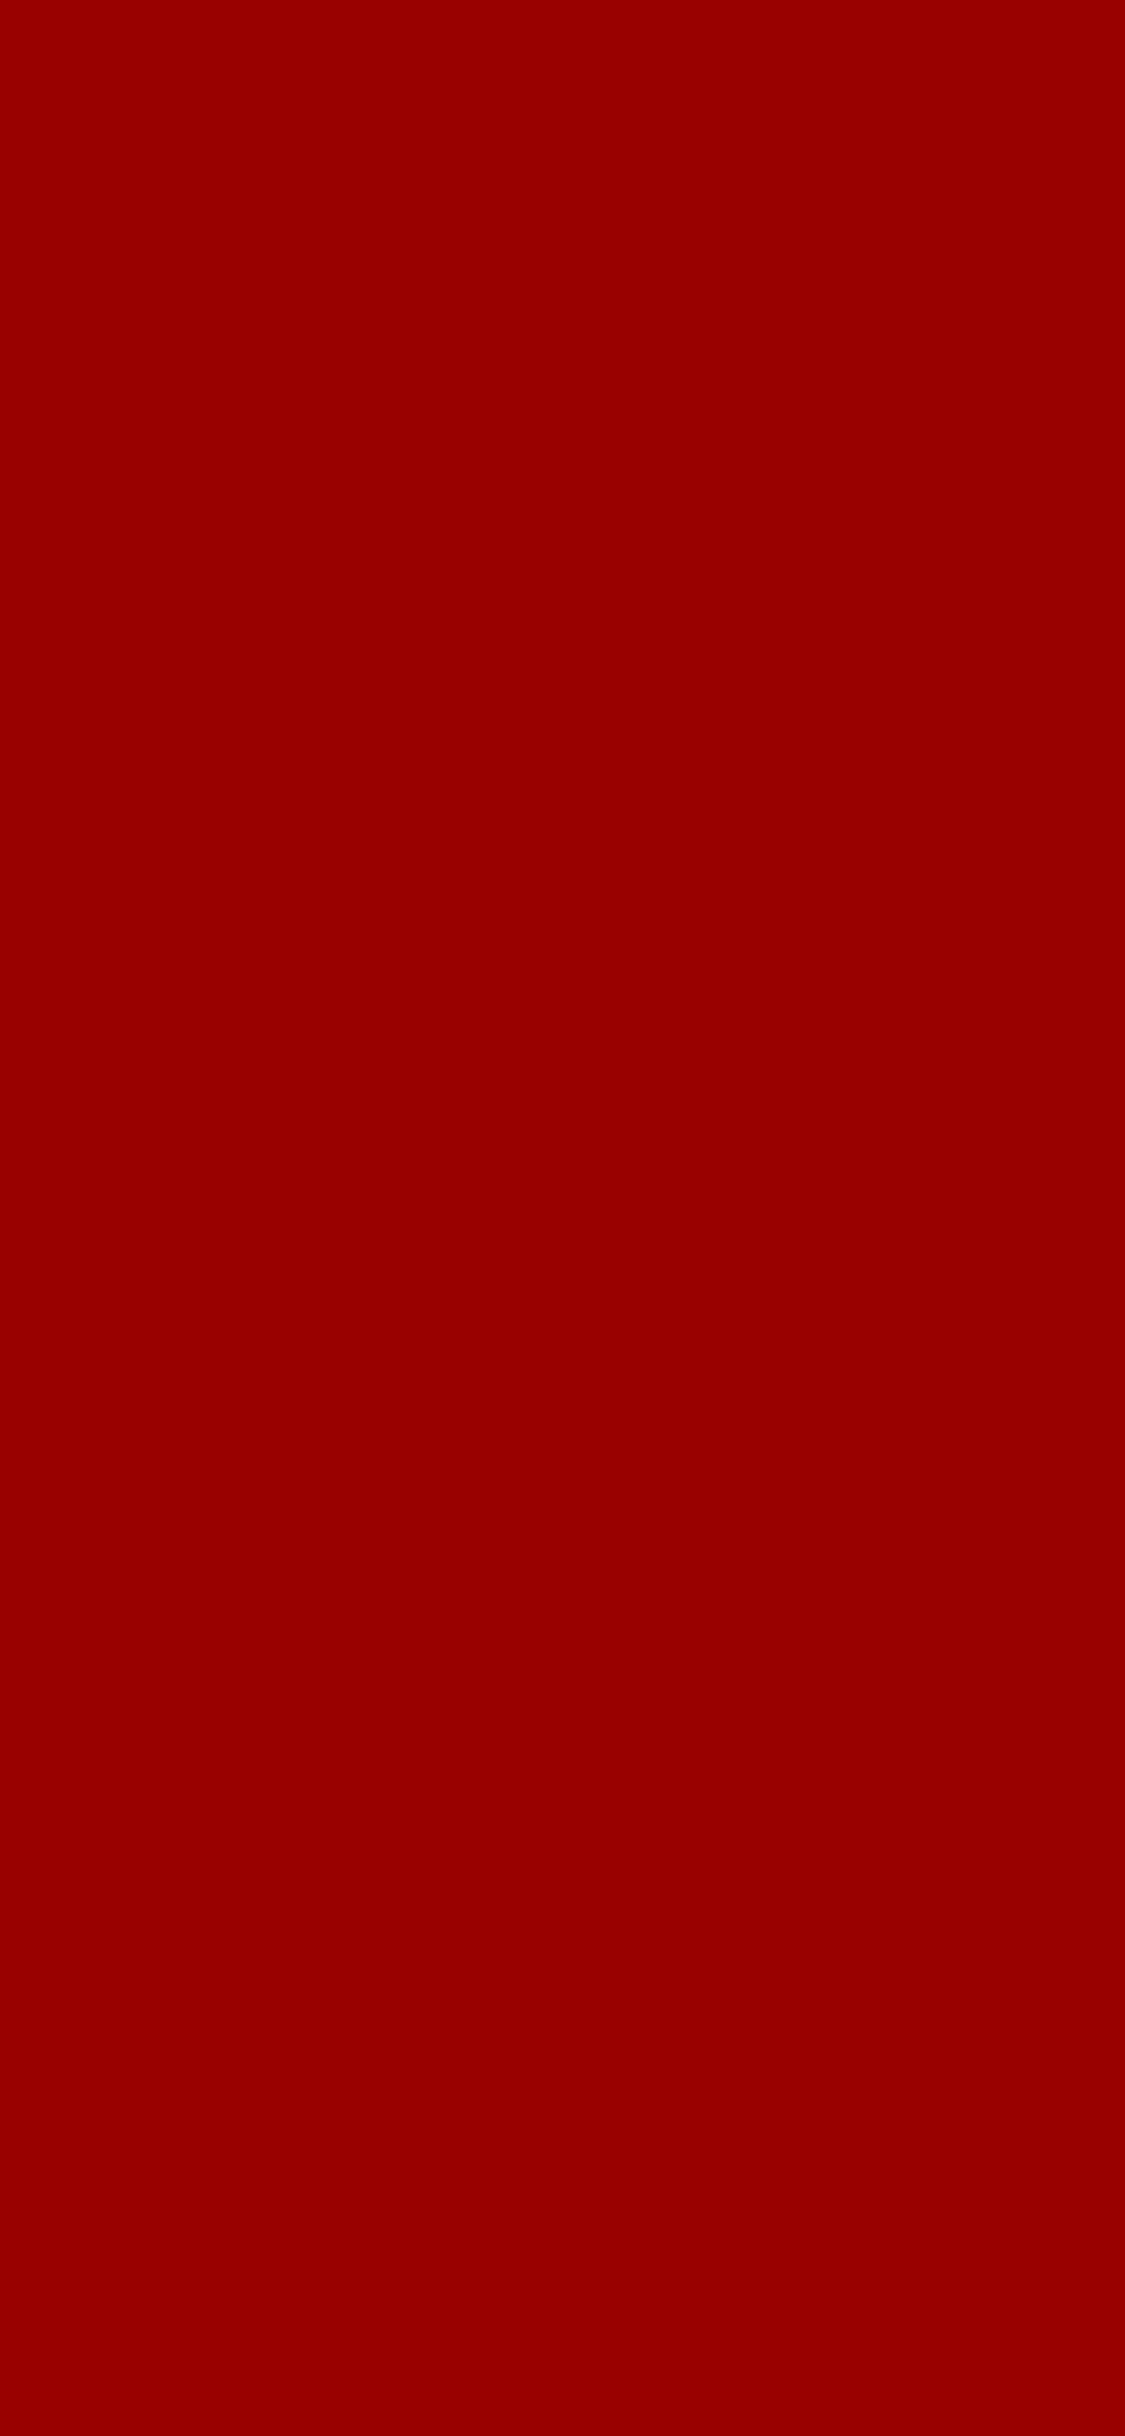 HD wallpaper crimson red stage  performance space curtain backgrounds   Wallpaper Flare